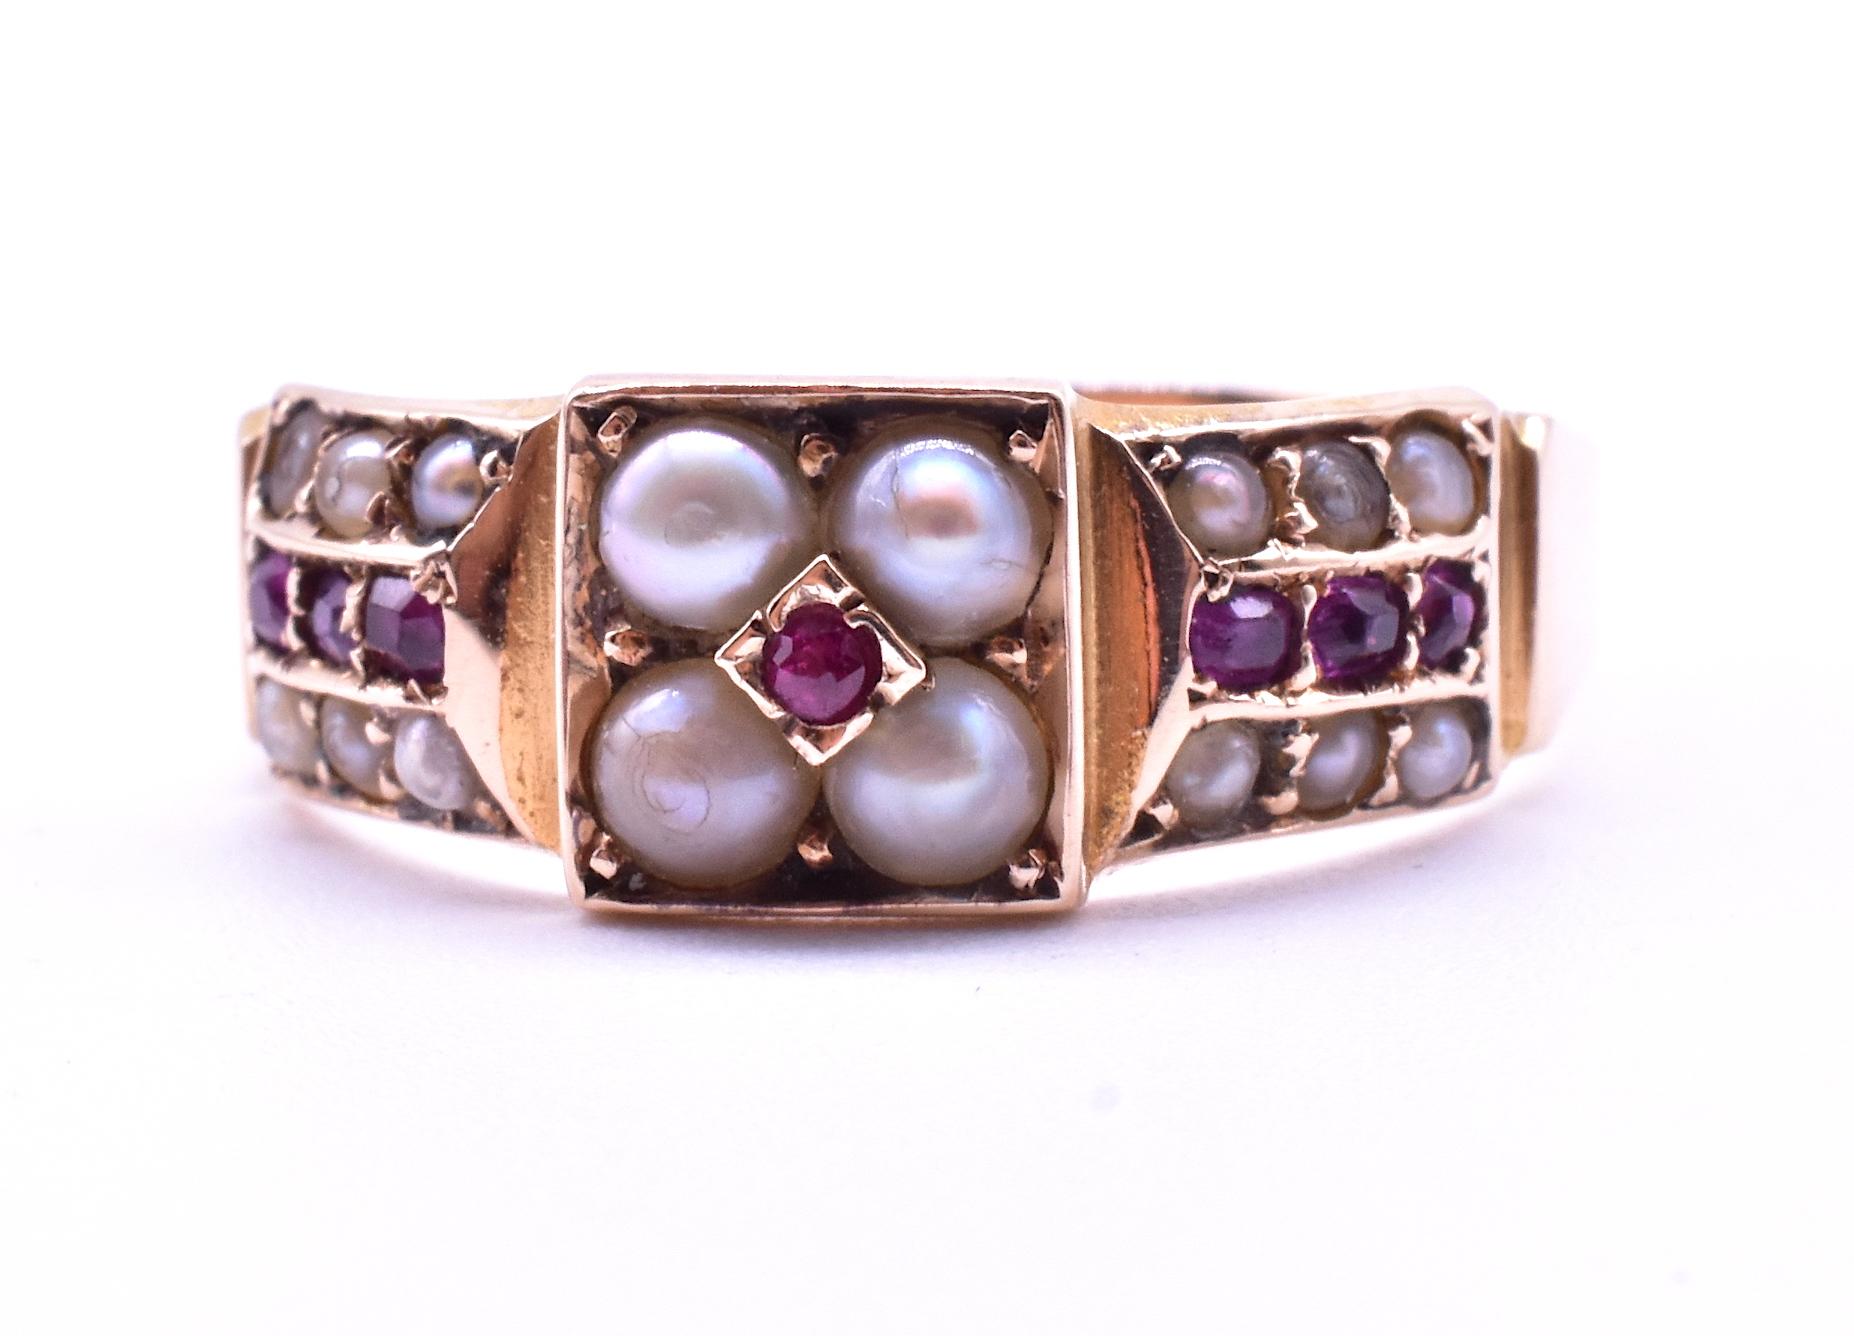 This ruby and pearl band ring, with its 7 deep purplish-red rubies, is the perfect accompaniment to other rings for your ring stack. Rubies are among the most prized and rare precious gems, and second only to diamonds in the Moh's hardness scale.